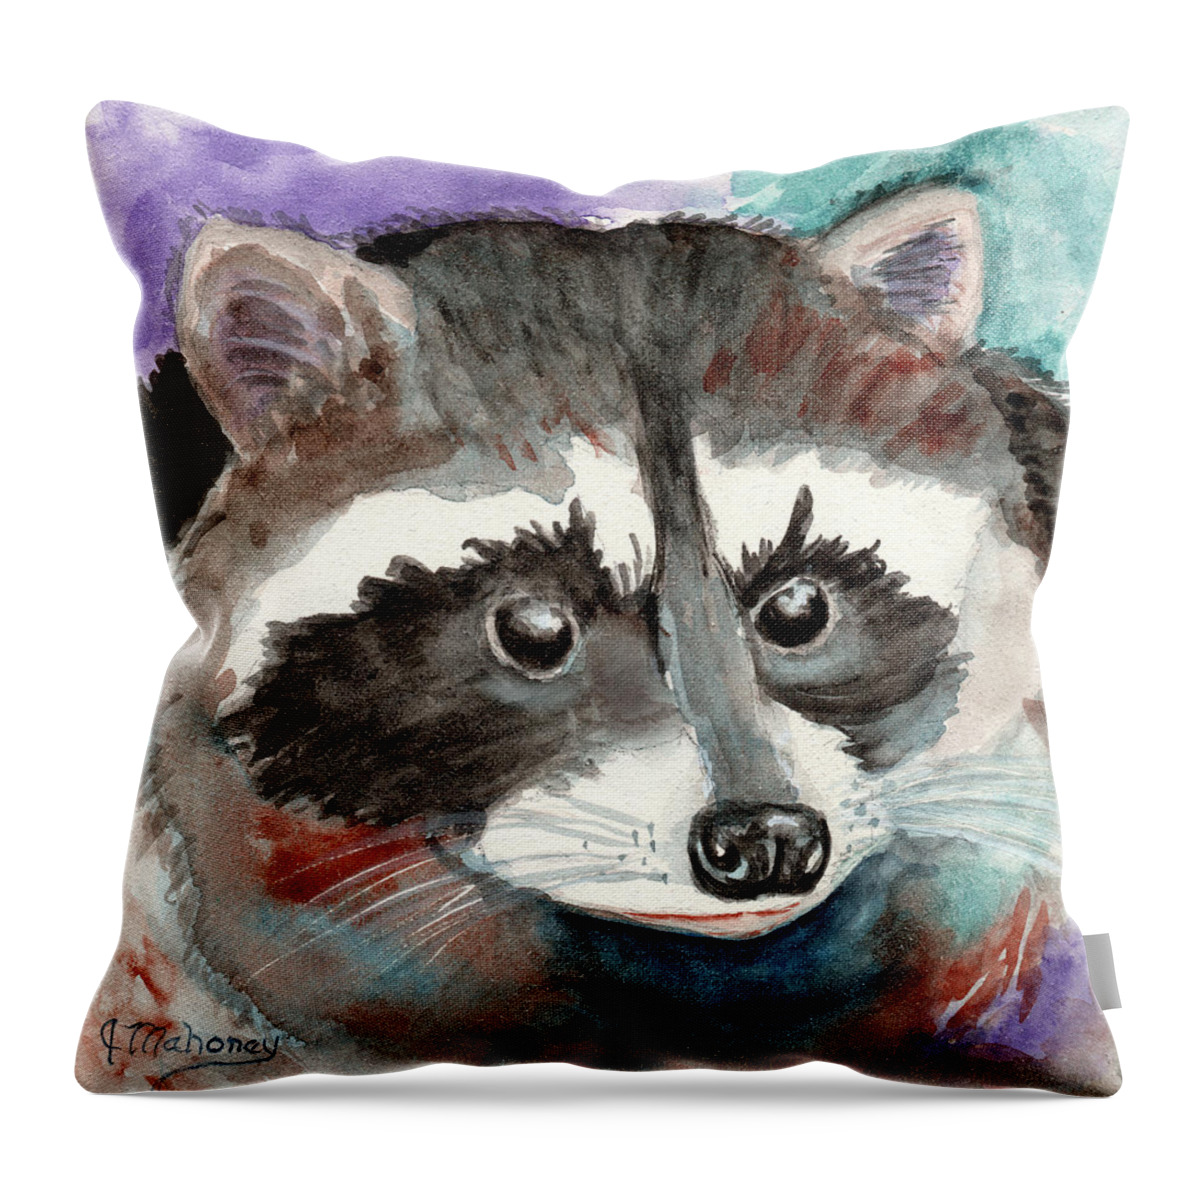 Racoon Throw Pillow featuring the painting Lil' Racoon by Jeanette Mahoney